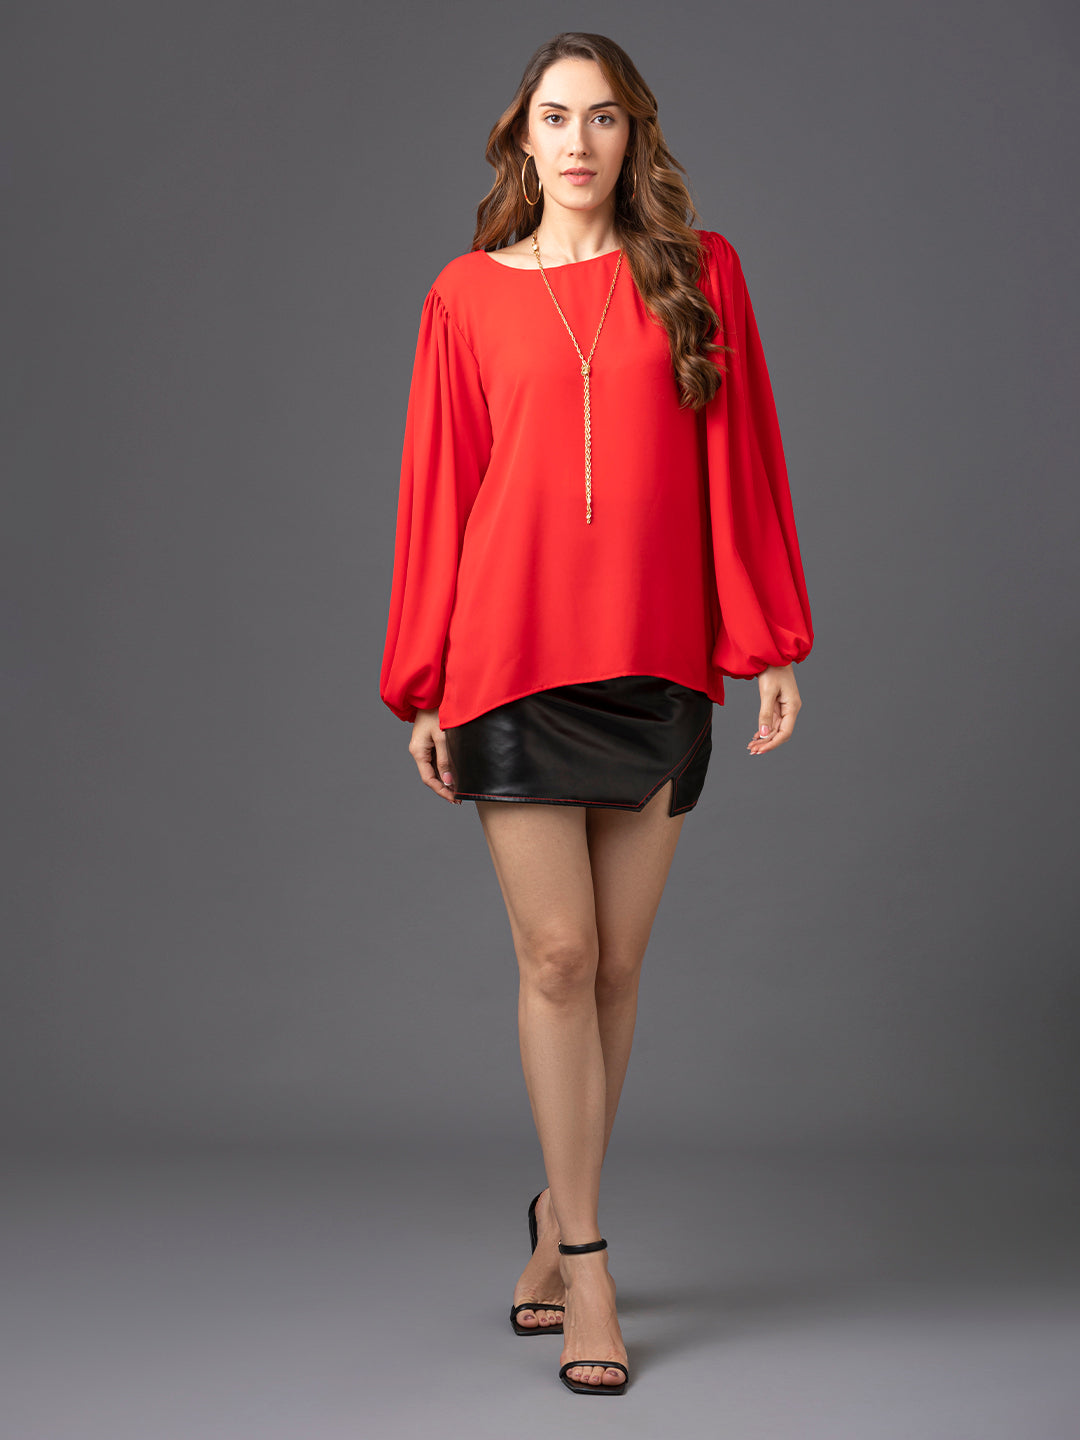 Victoria Long Sleeve Top - Red